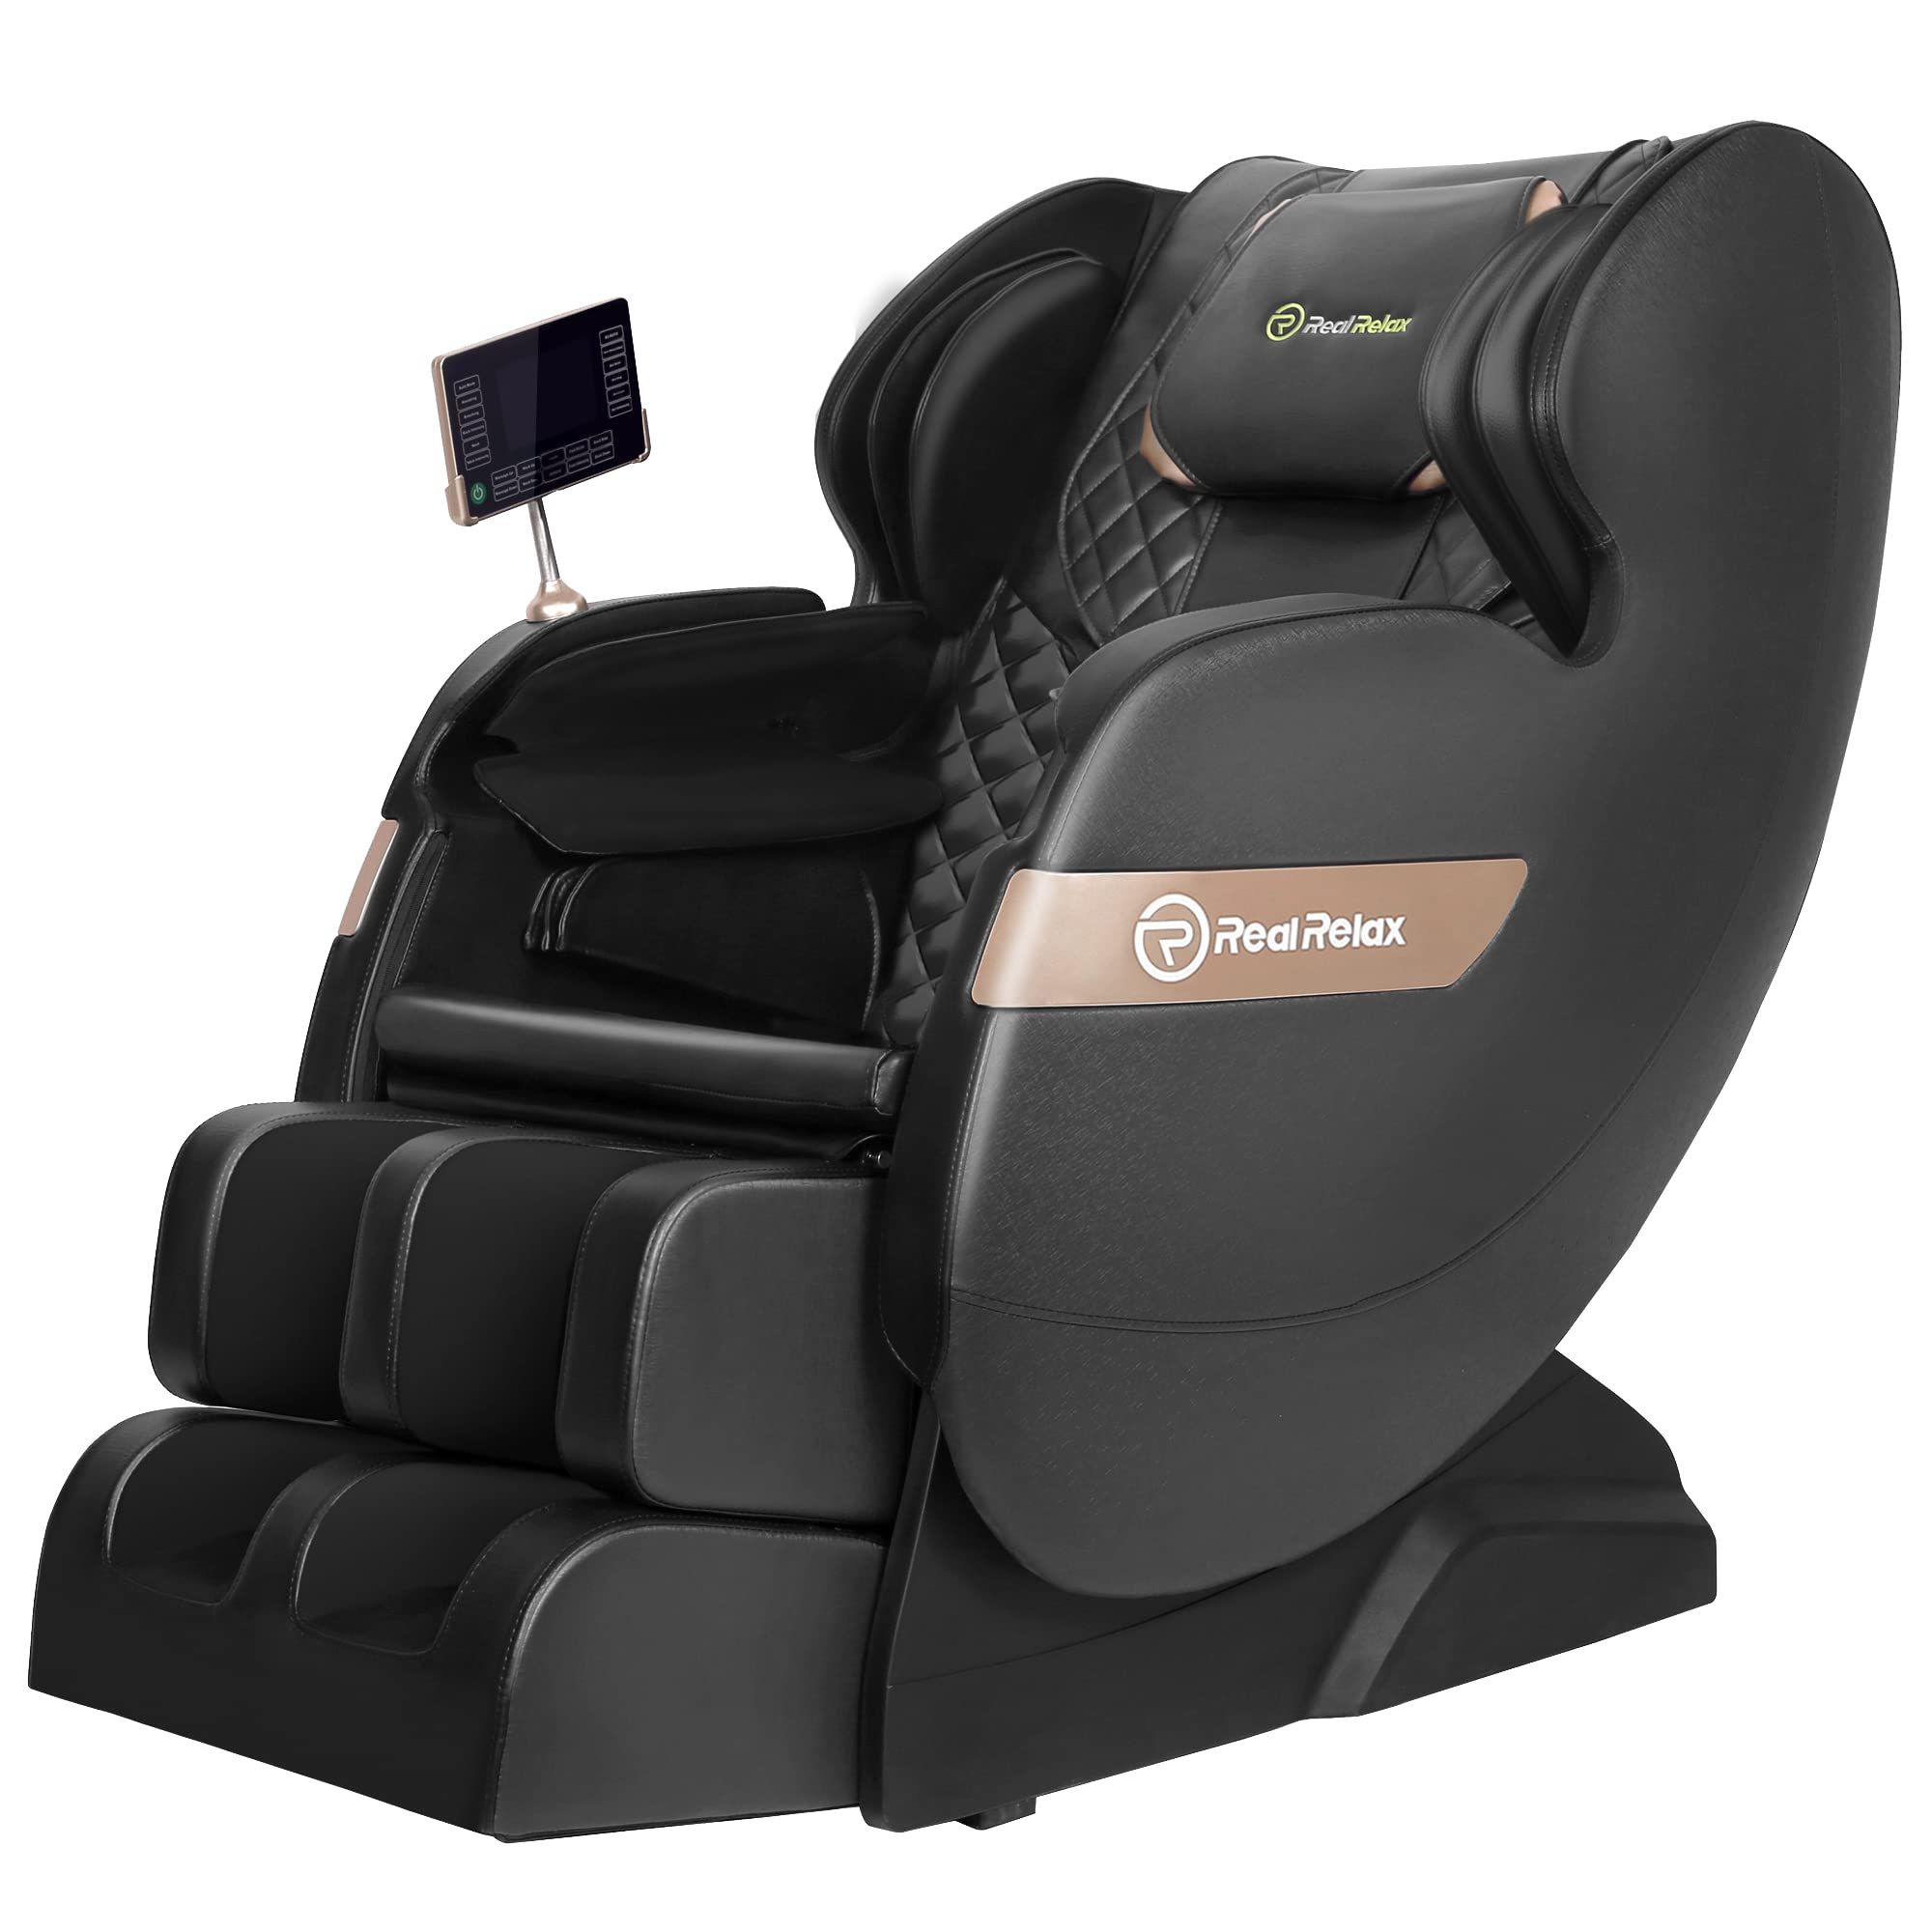 Real Relax 2022 Massage Chair of Dual-core S Track Recliner with Smart Voice Controller Zero Gravity | Amazon (US)